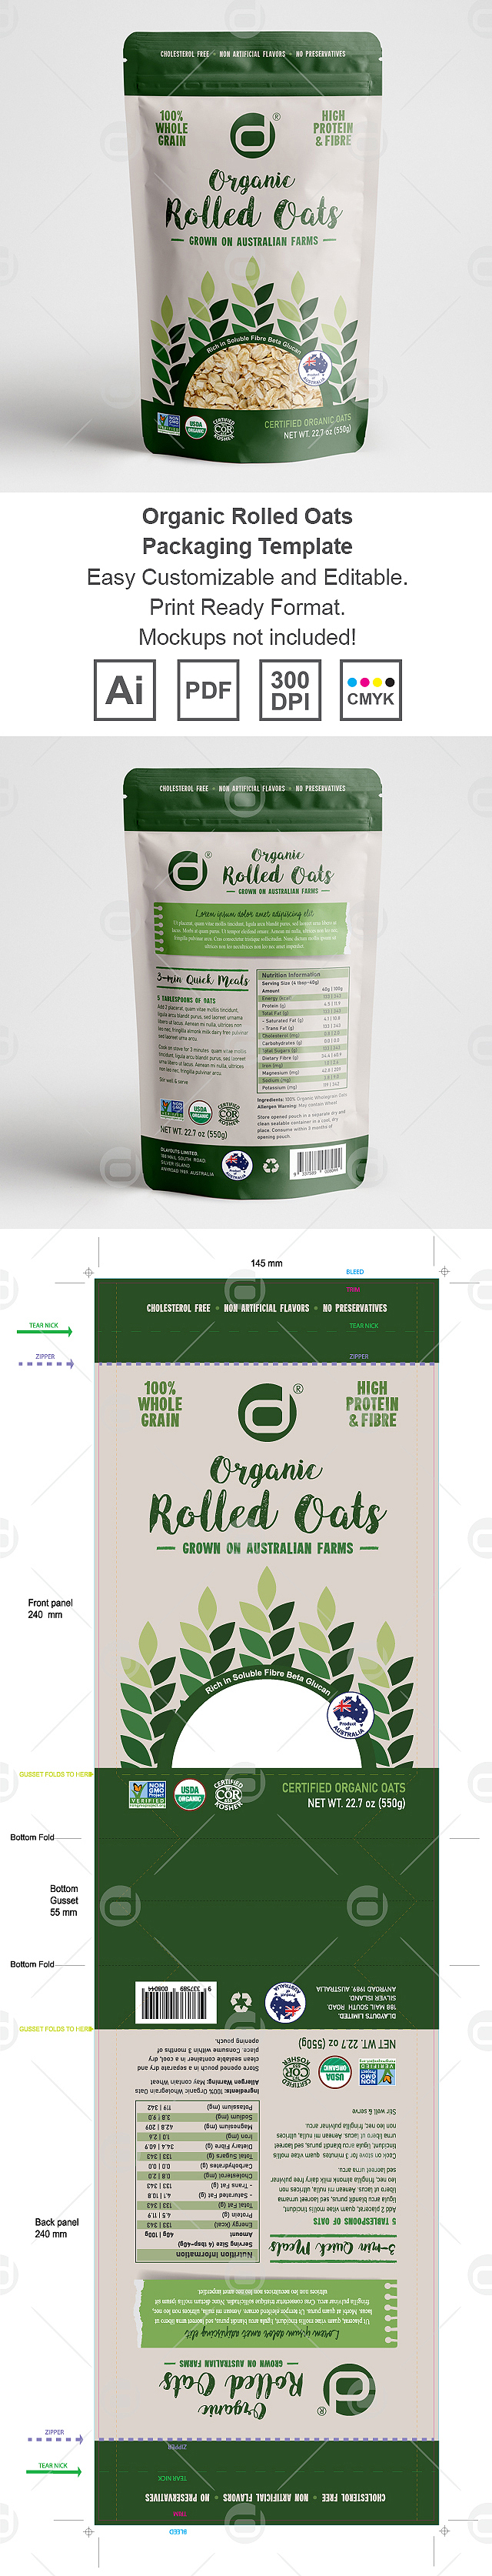 Organic Rolled Oats Packaging Template